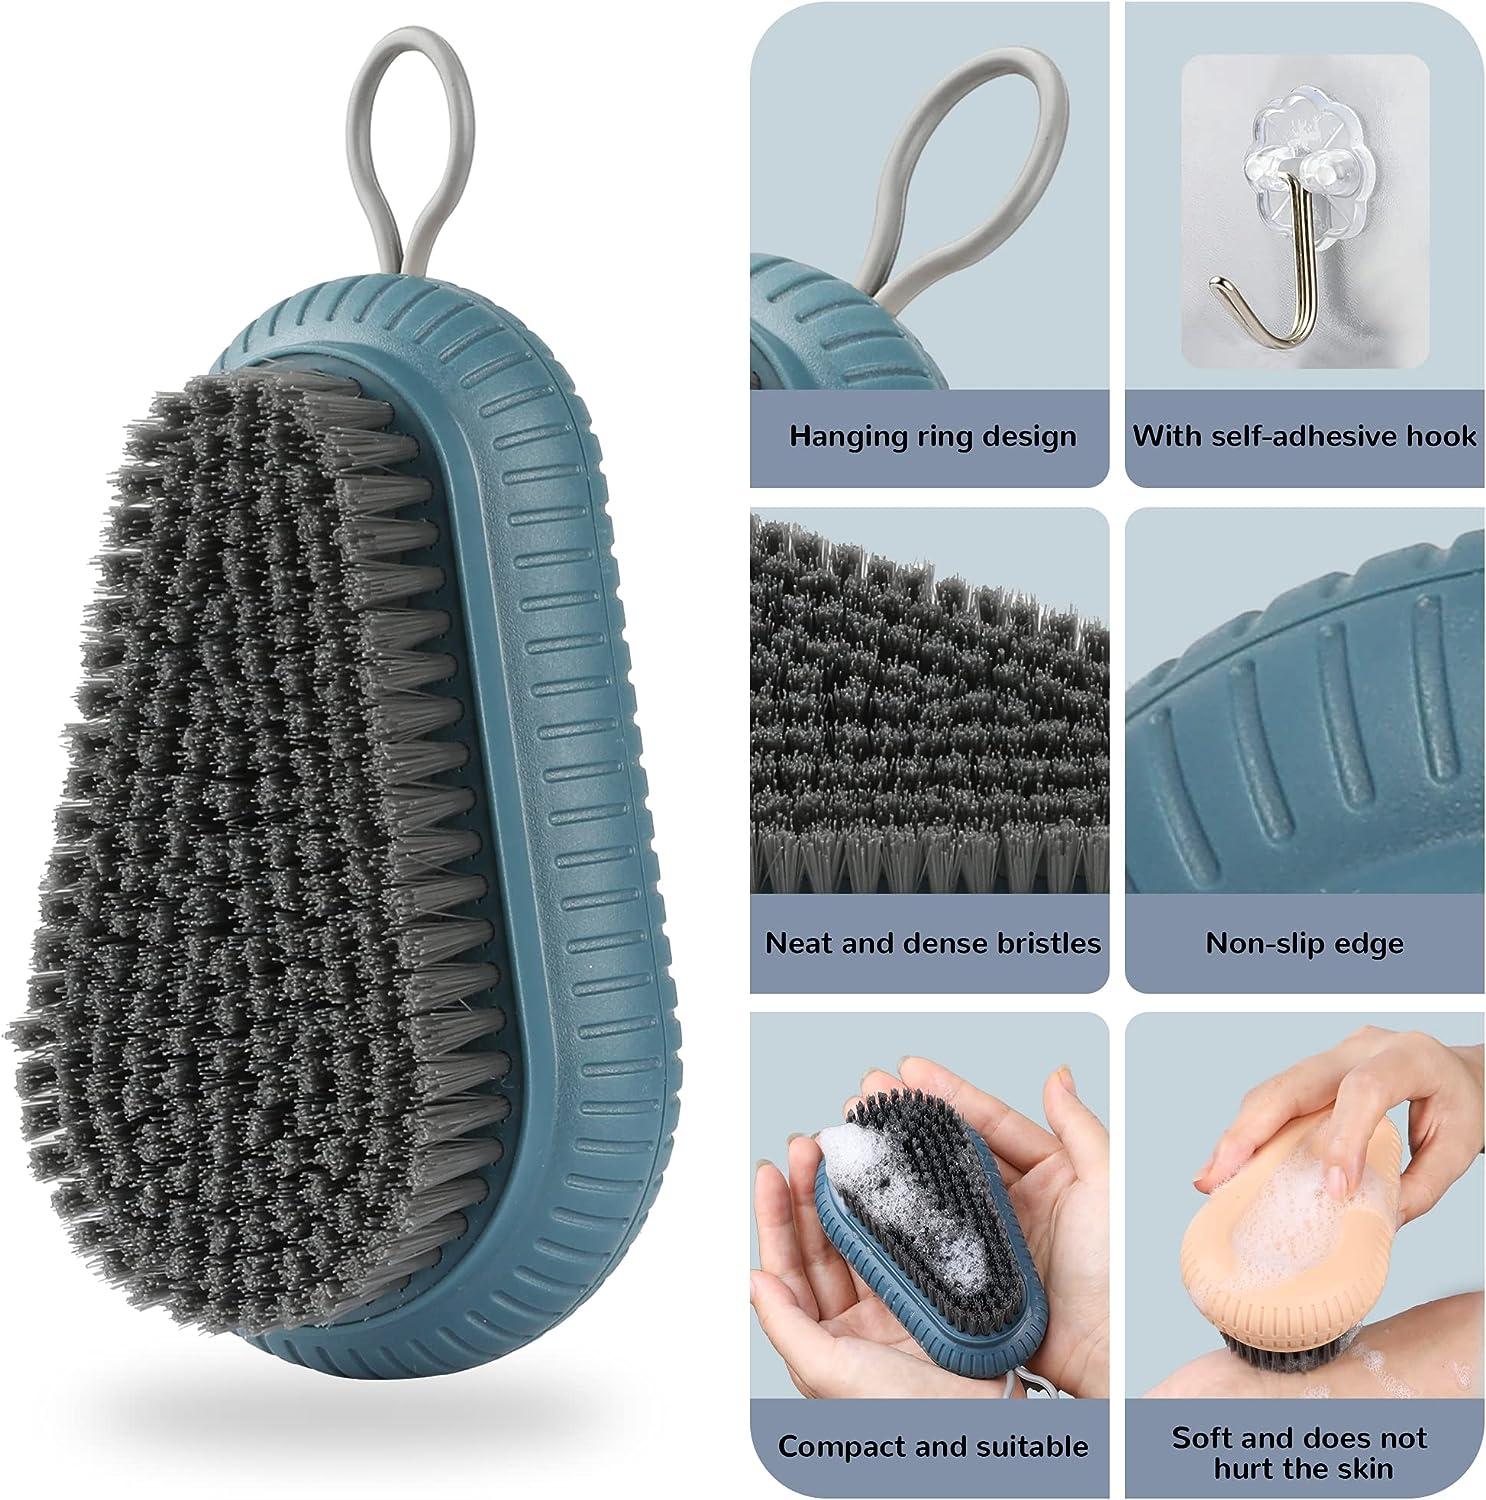 Multifunctional Cleaning Brush Portable Plastic Clothes Shoes Hydraulic  Laundry Brush Hands Cleaning Brush Kitchen Bathroom